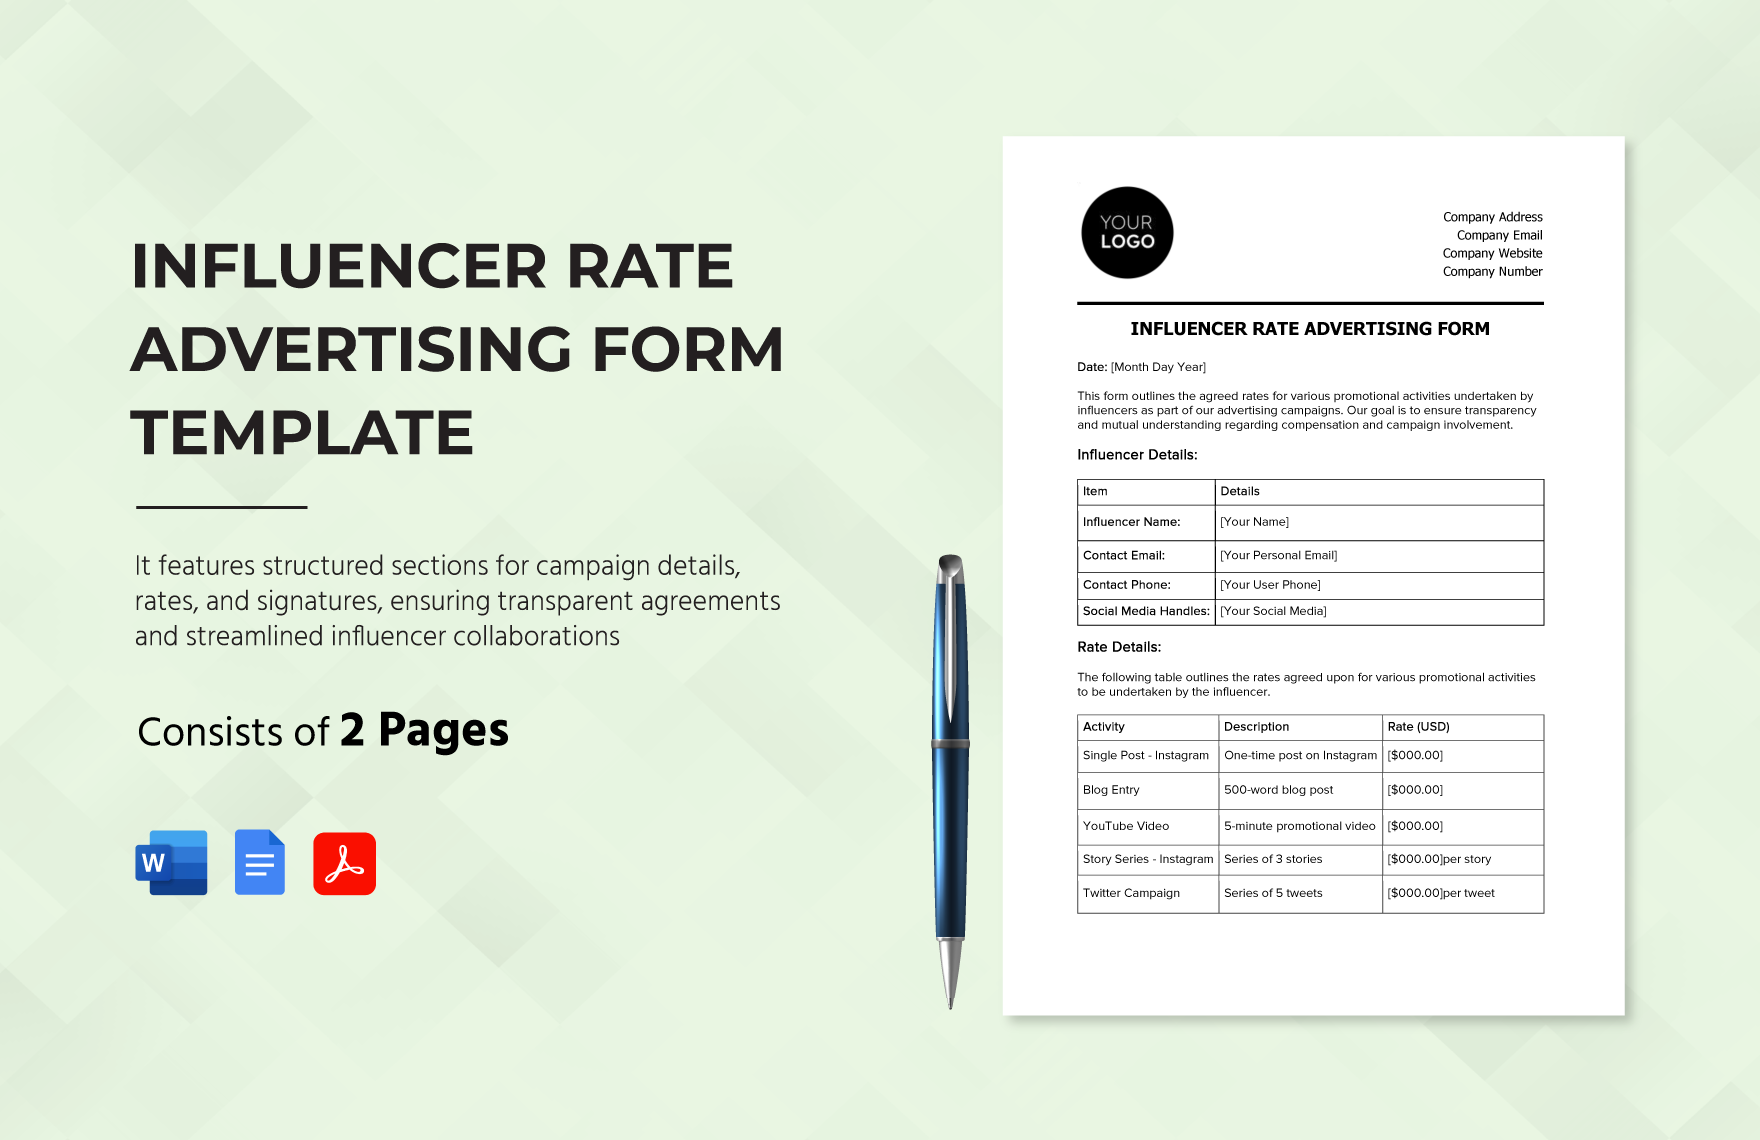 Influencer Rate Advertising Form Template